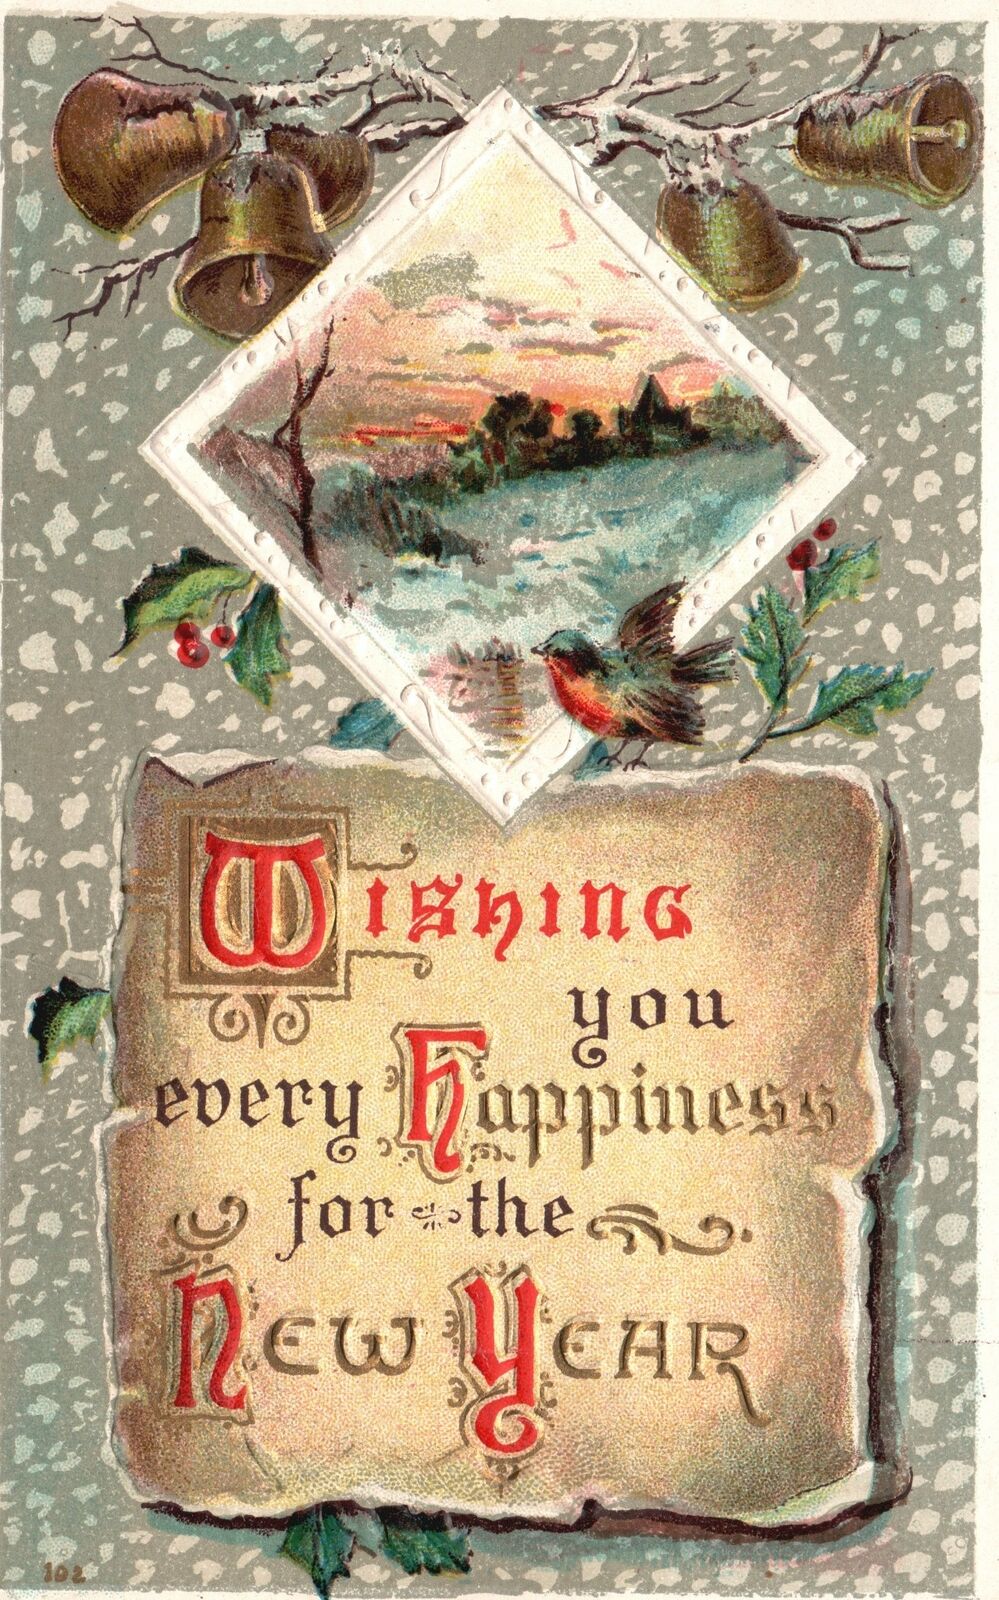 Vintage Postcard 1911 Wishing You Every Happiness For The New Year Greetings